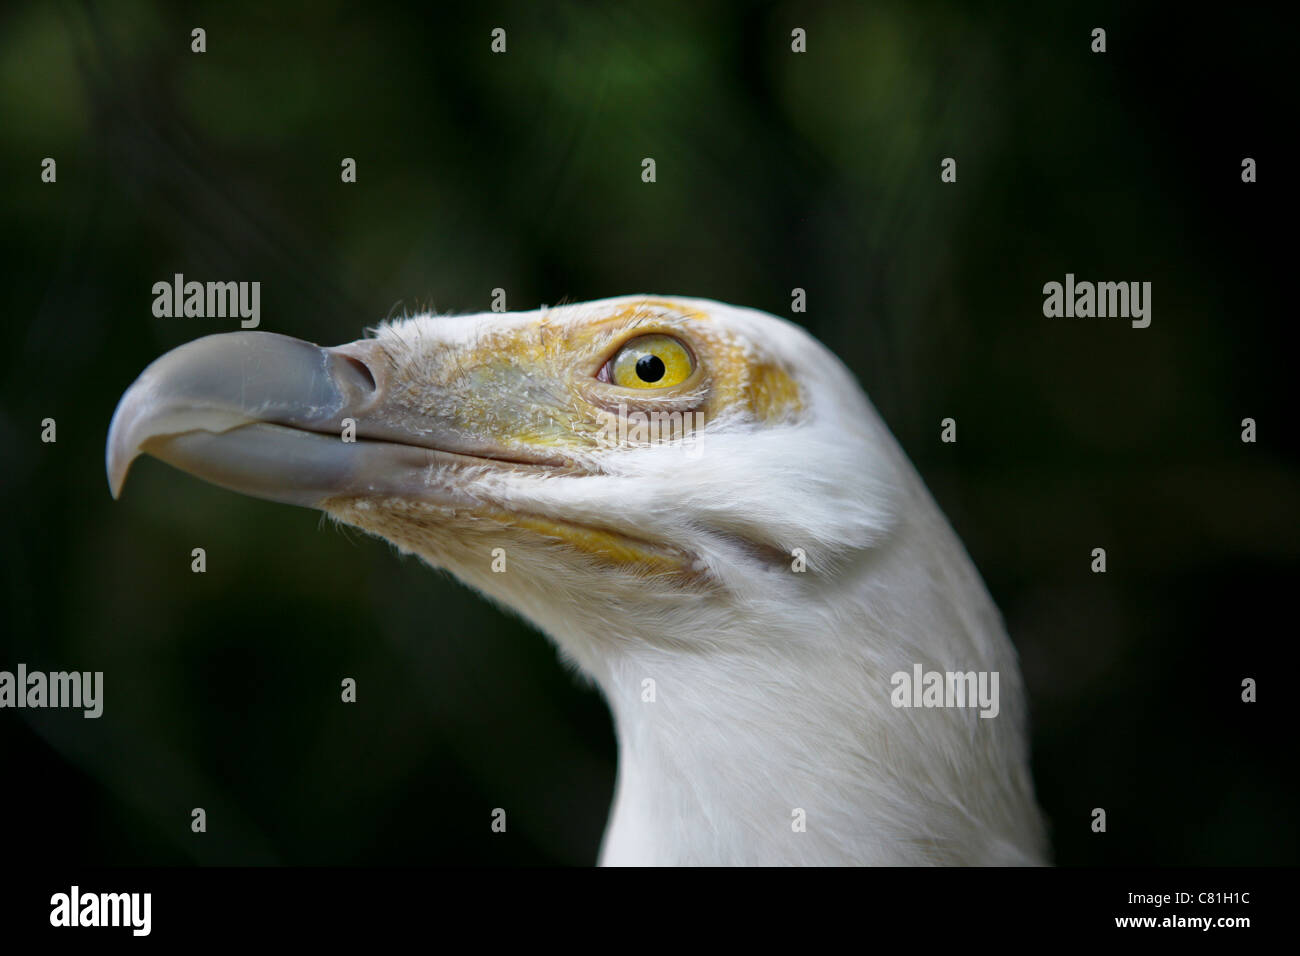 Gypohierax angolensis, Palm-nut Vulture / Vulturine Fish Eagle. Head of a white vulture, dark background. Stock Photo